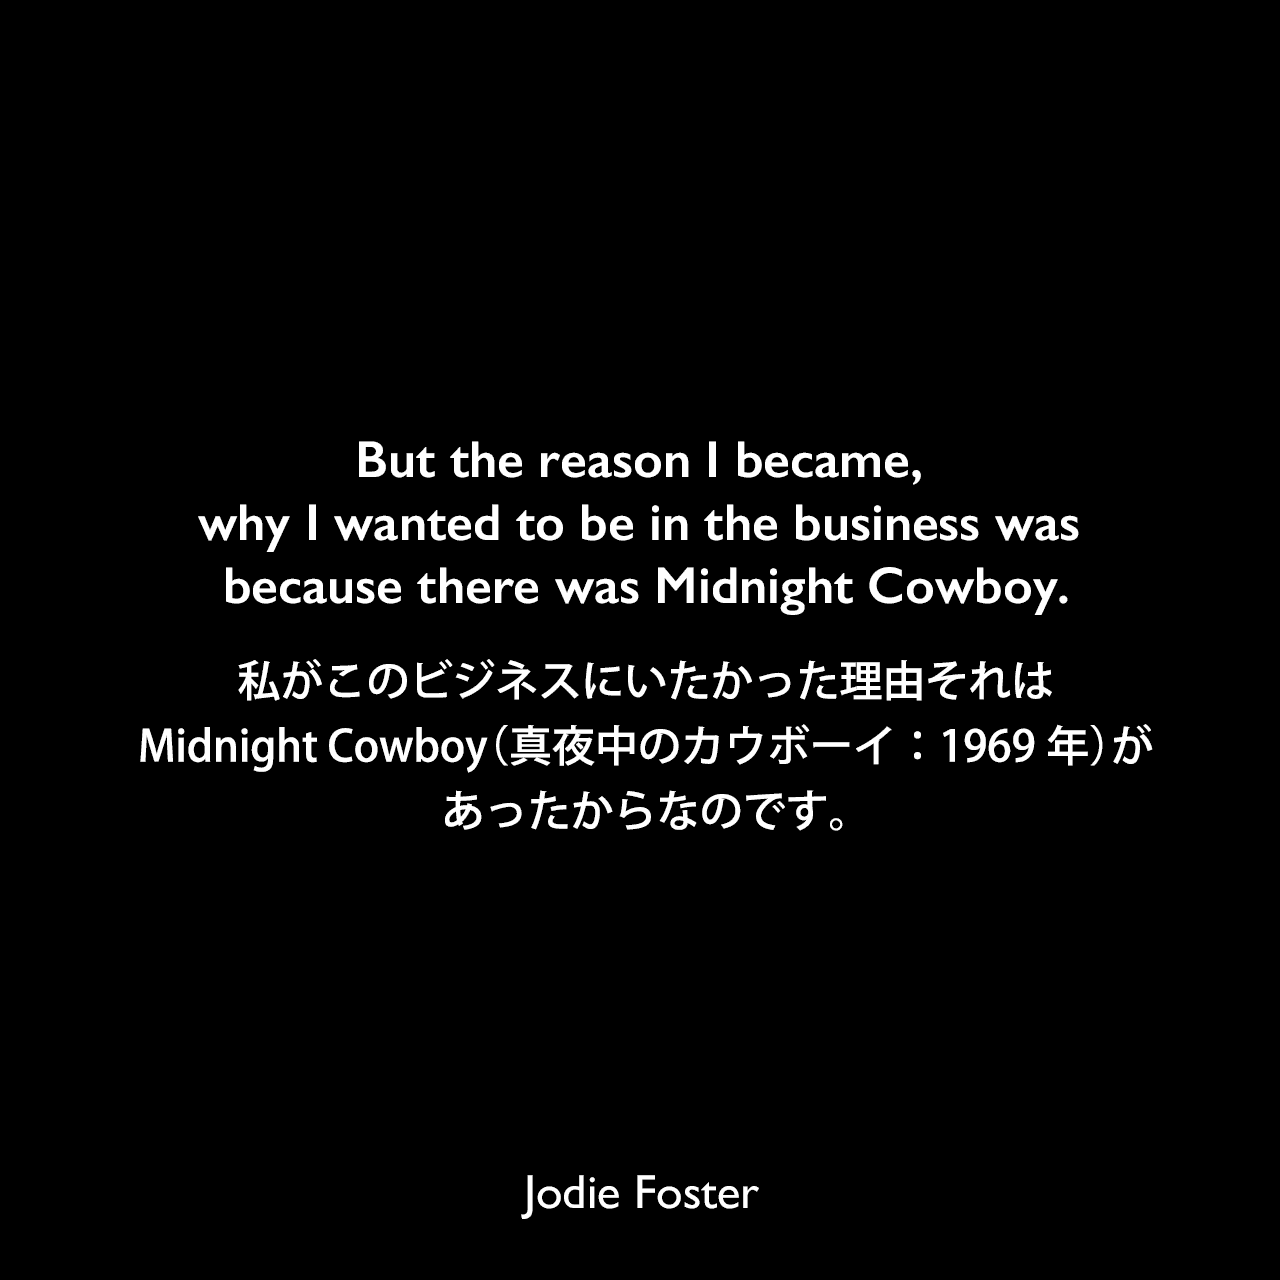 But the reason I became, why I wanted to be in the business was because there was Midnight Cowboy.私がこのビジネスにいたかった理由、それはMidnight Cowboy（真夜中のカウボーイ：1969年）があったからなのです。Jodie Foster